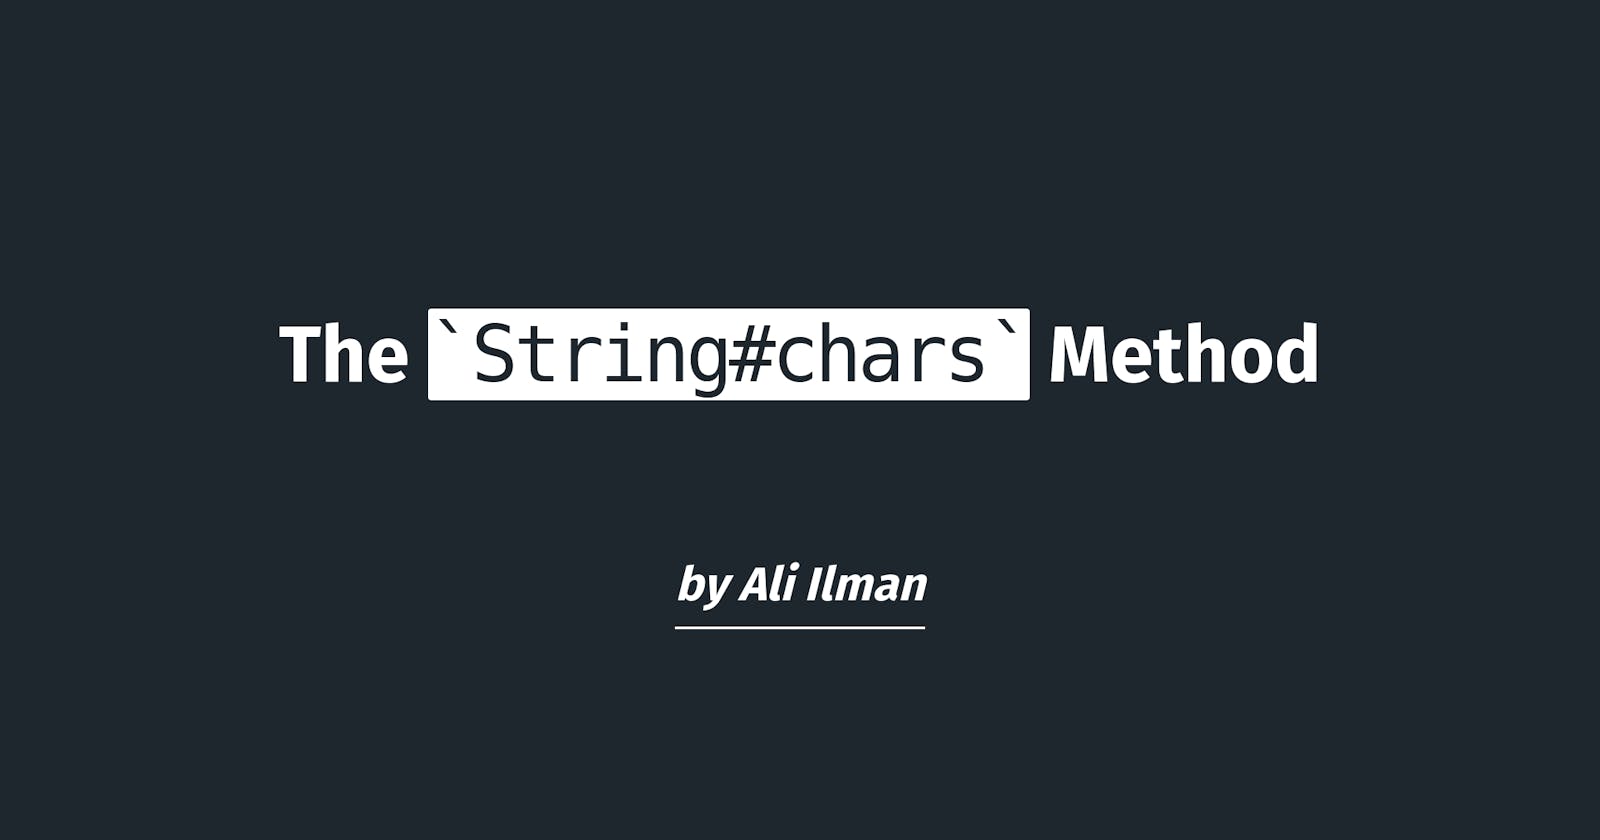 The String#chars Method